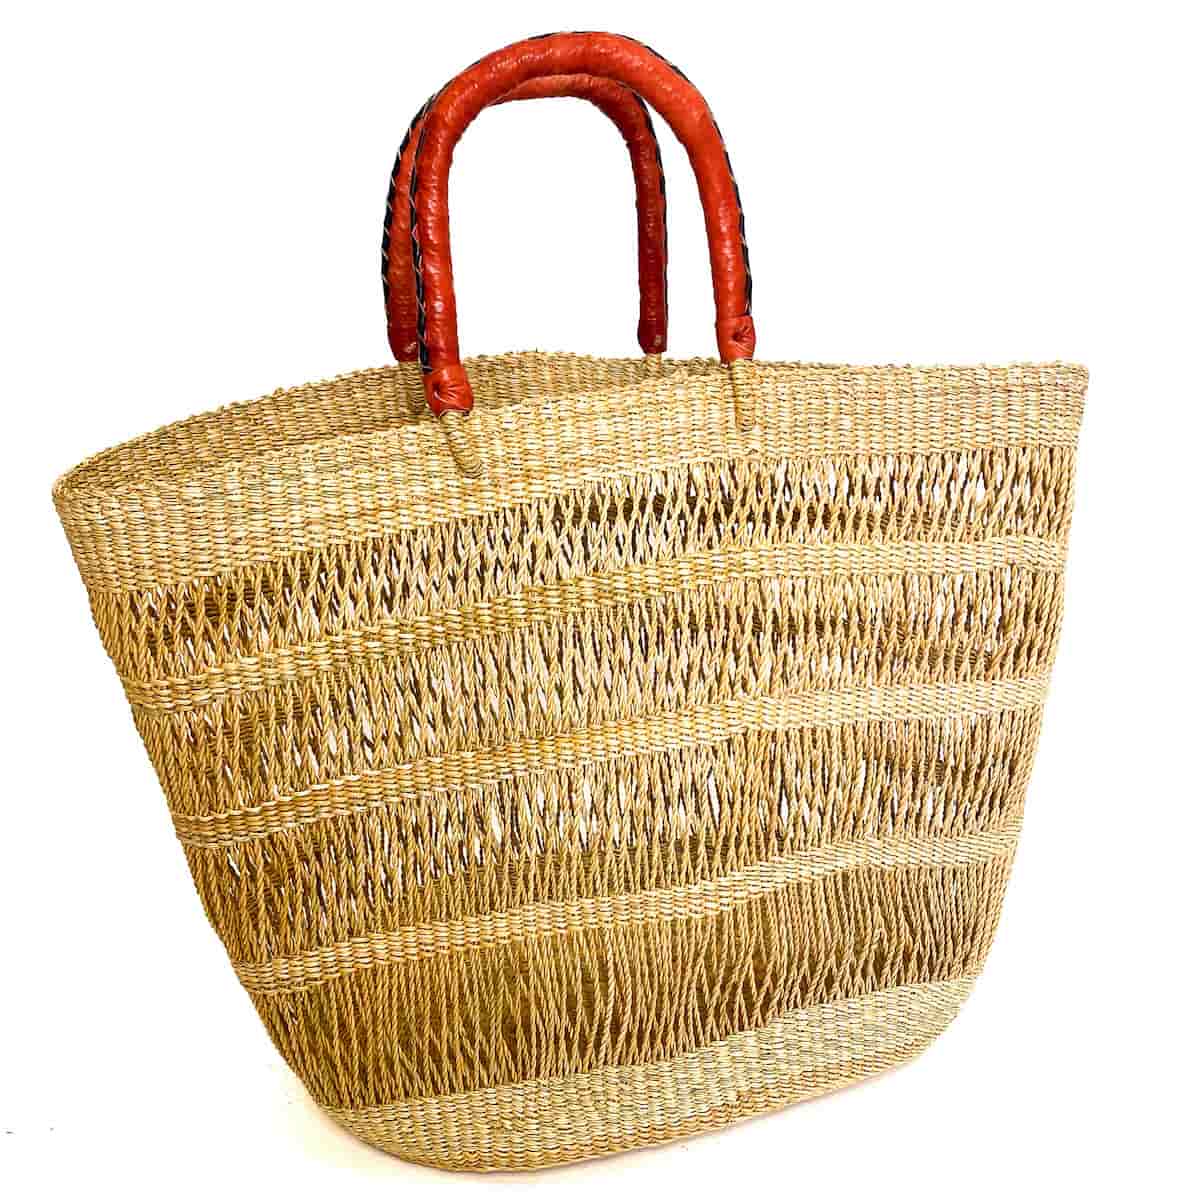 Large Beach Baskets Natural- brown handles with black detailing